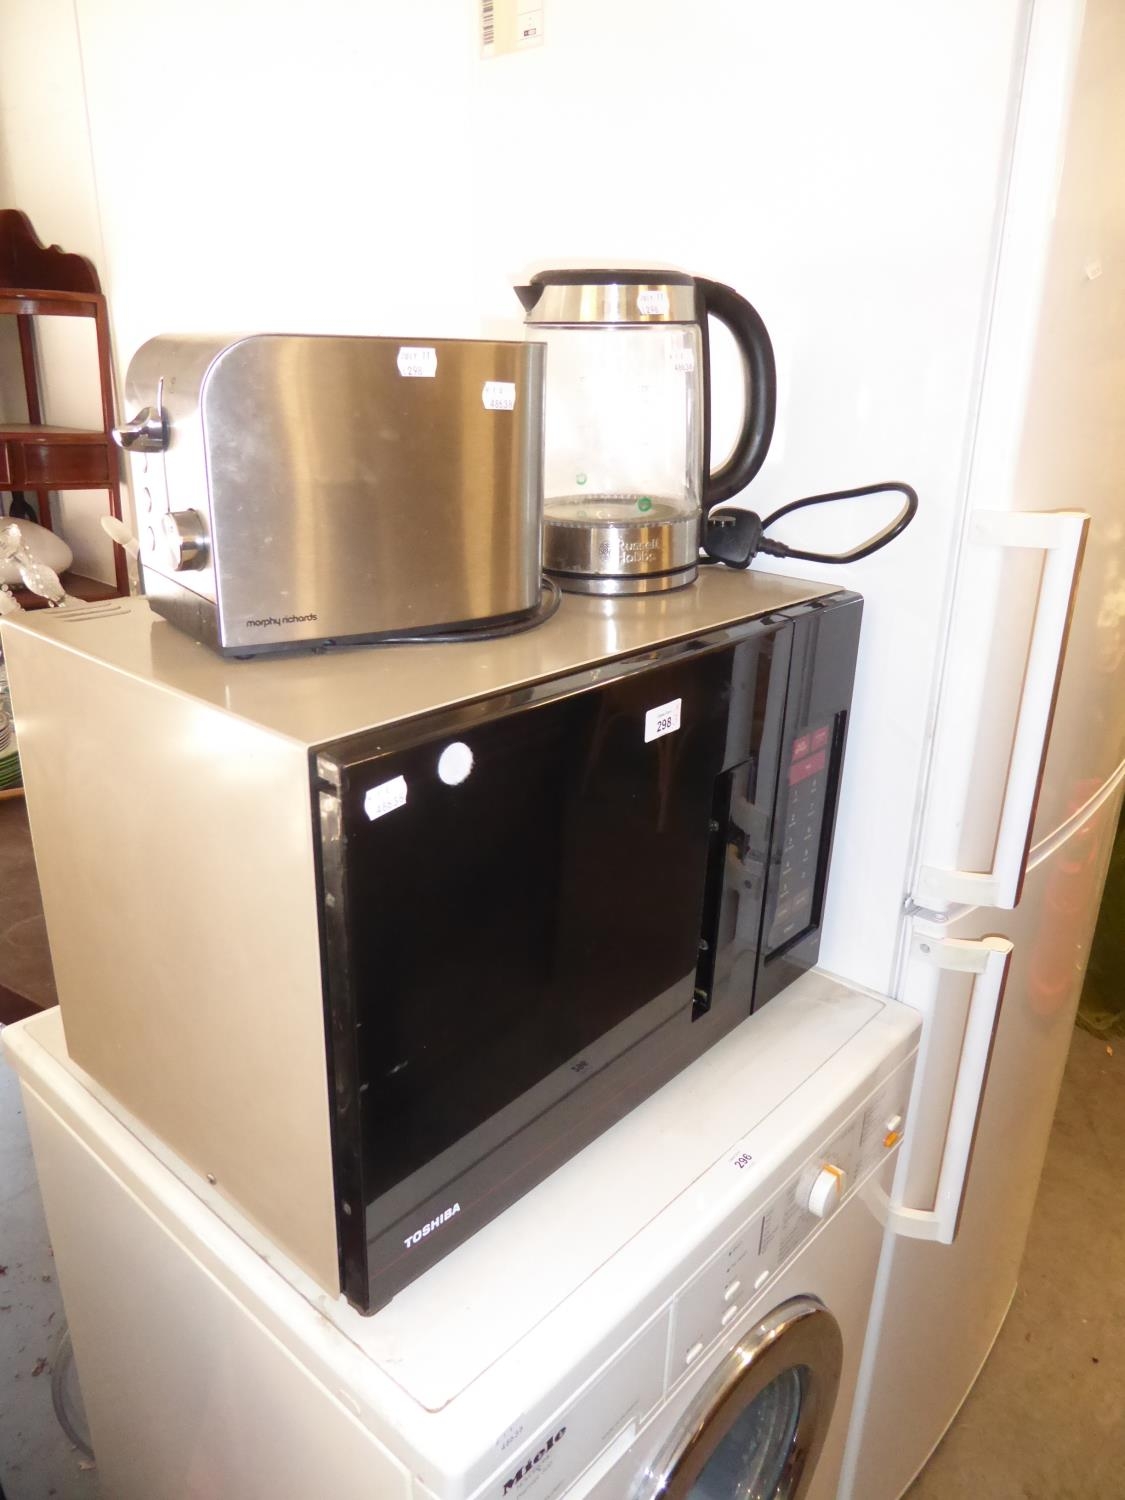 TOSHIBA ER7800 MICROWAVE; AN ELECTRIC KETTLE; ELECTRIC TOASTER (3)